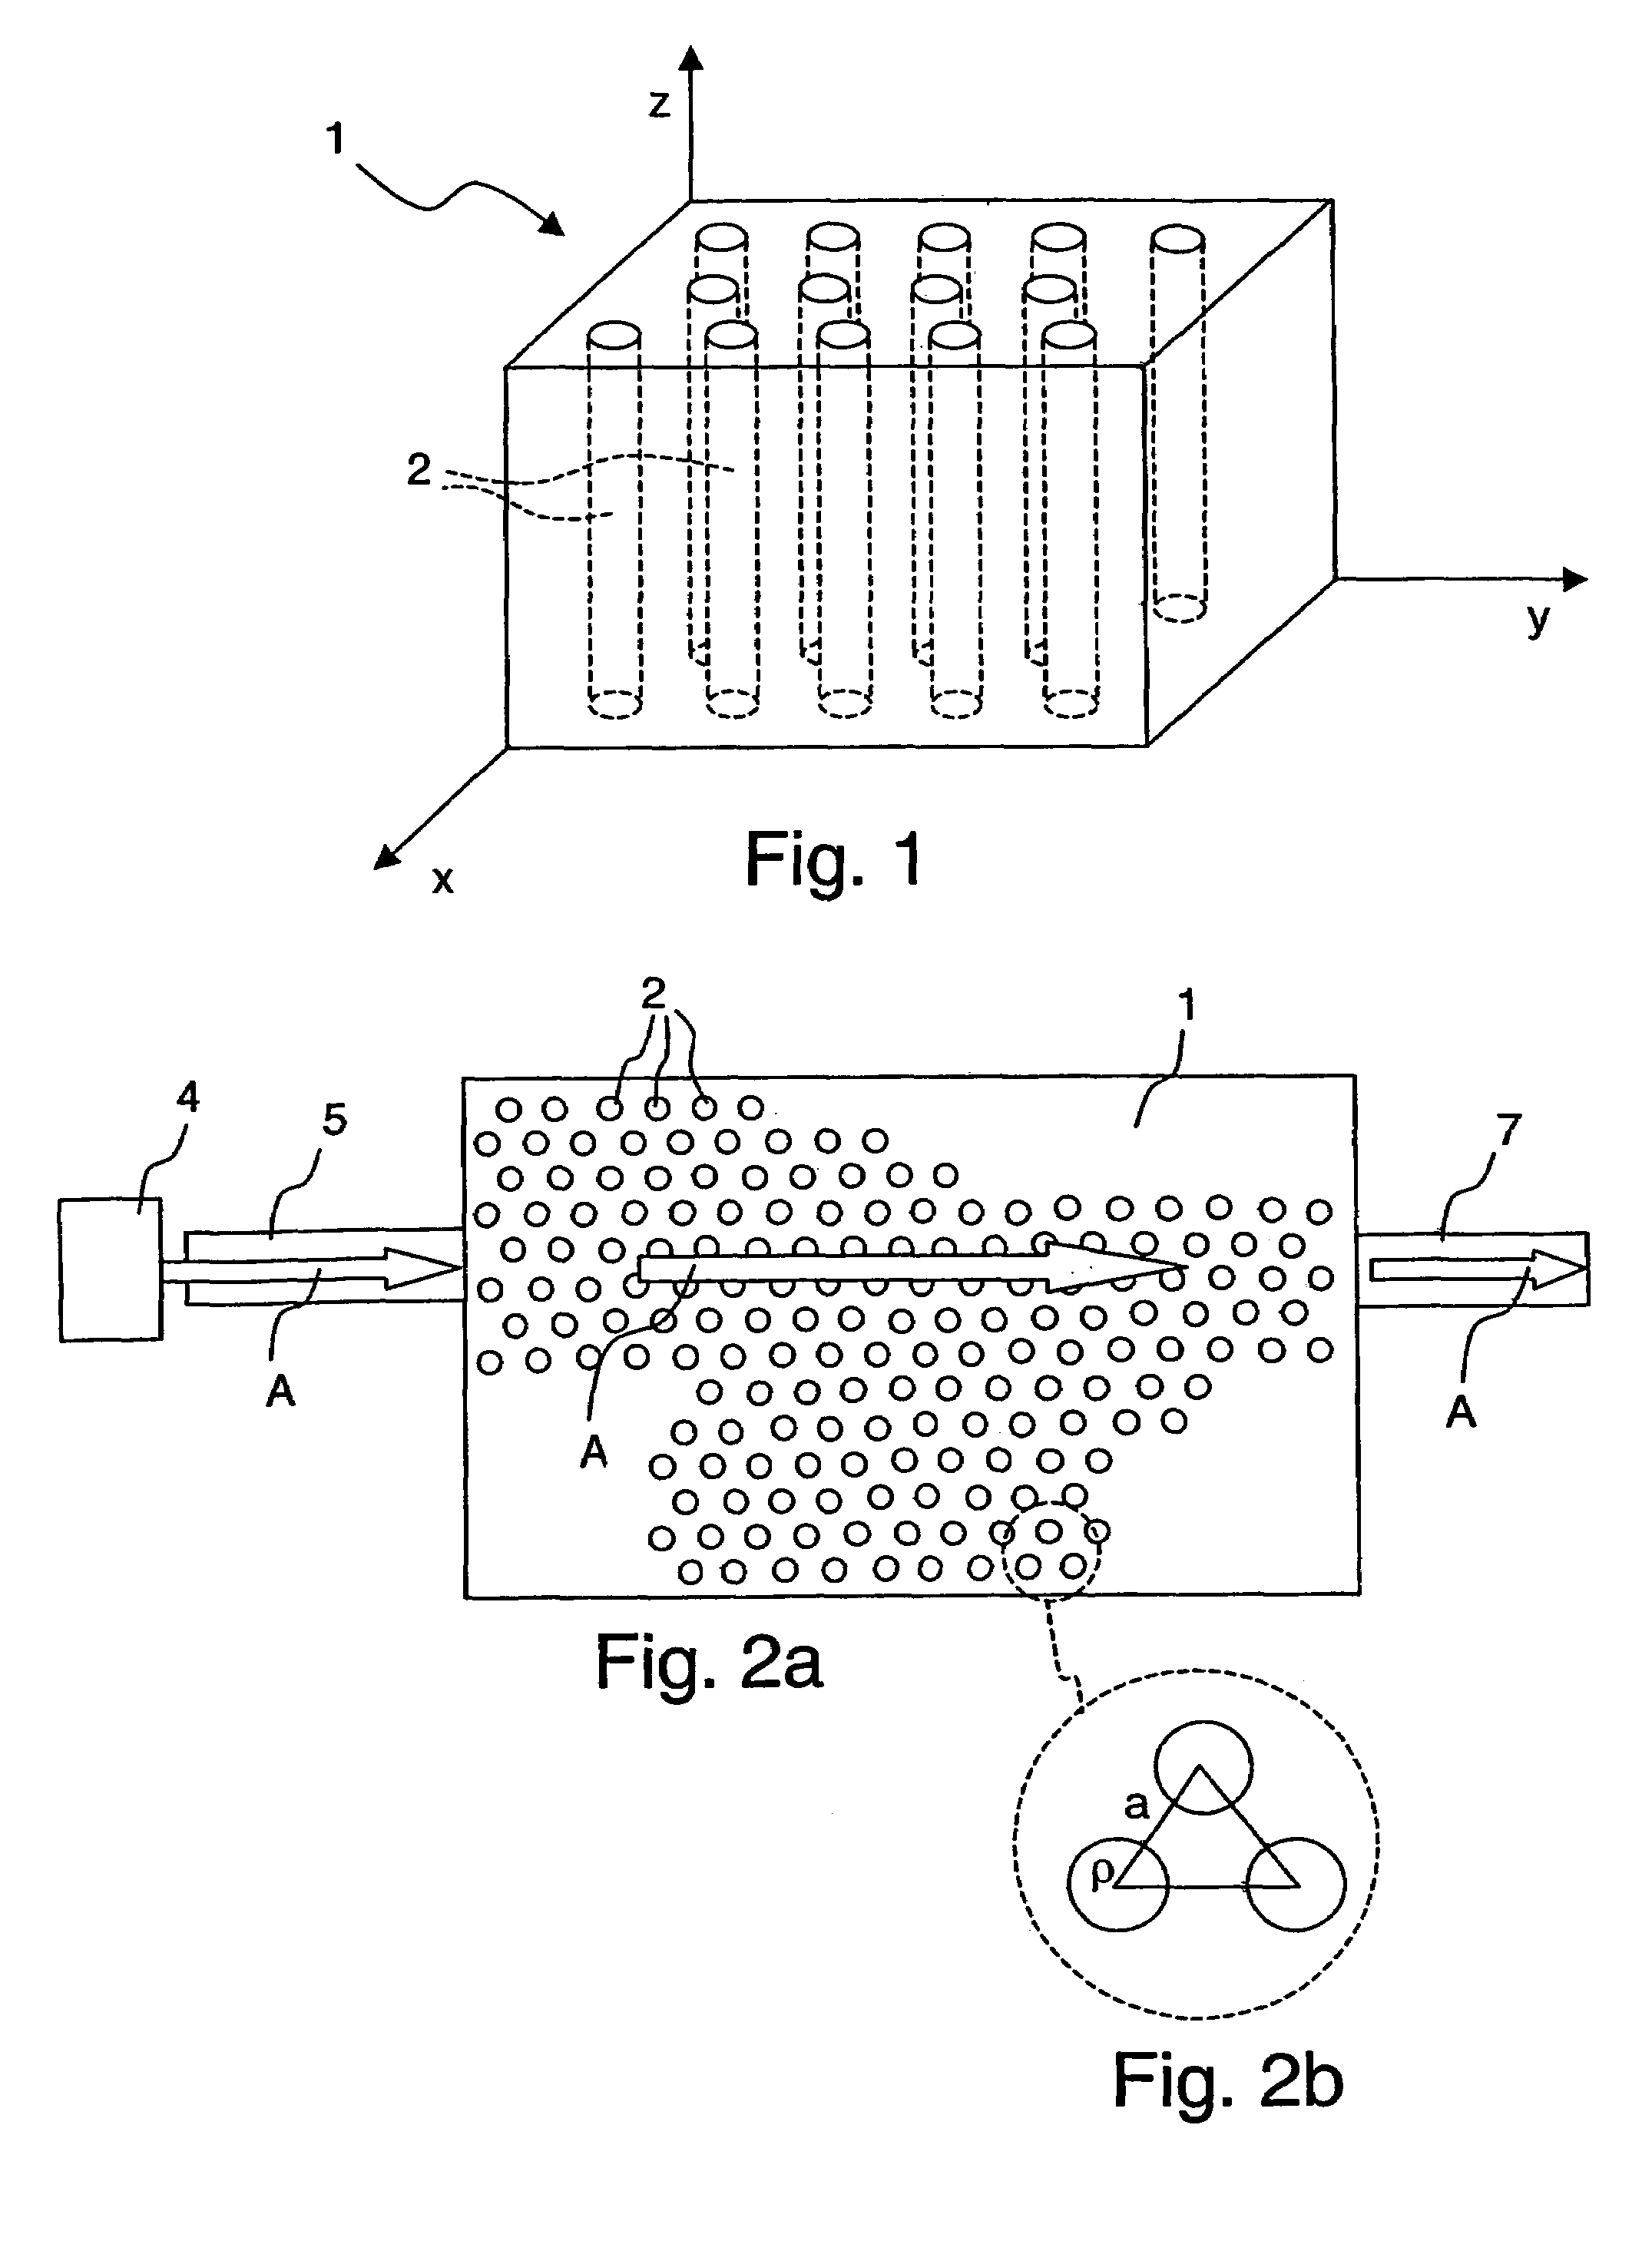 Method for guiding an electromagnetic radiation, in particular in an integrated optical device